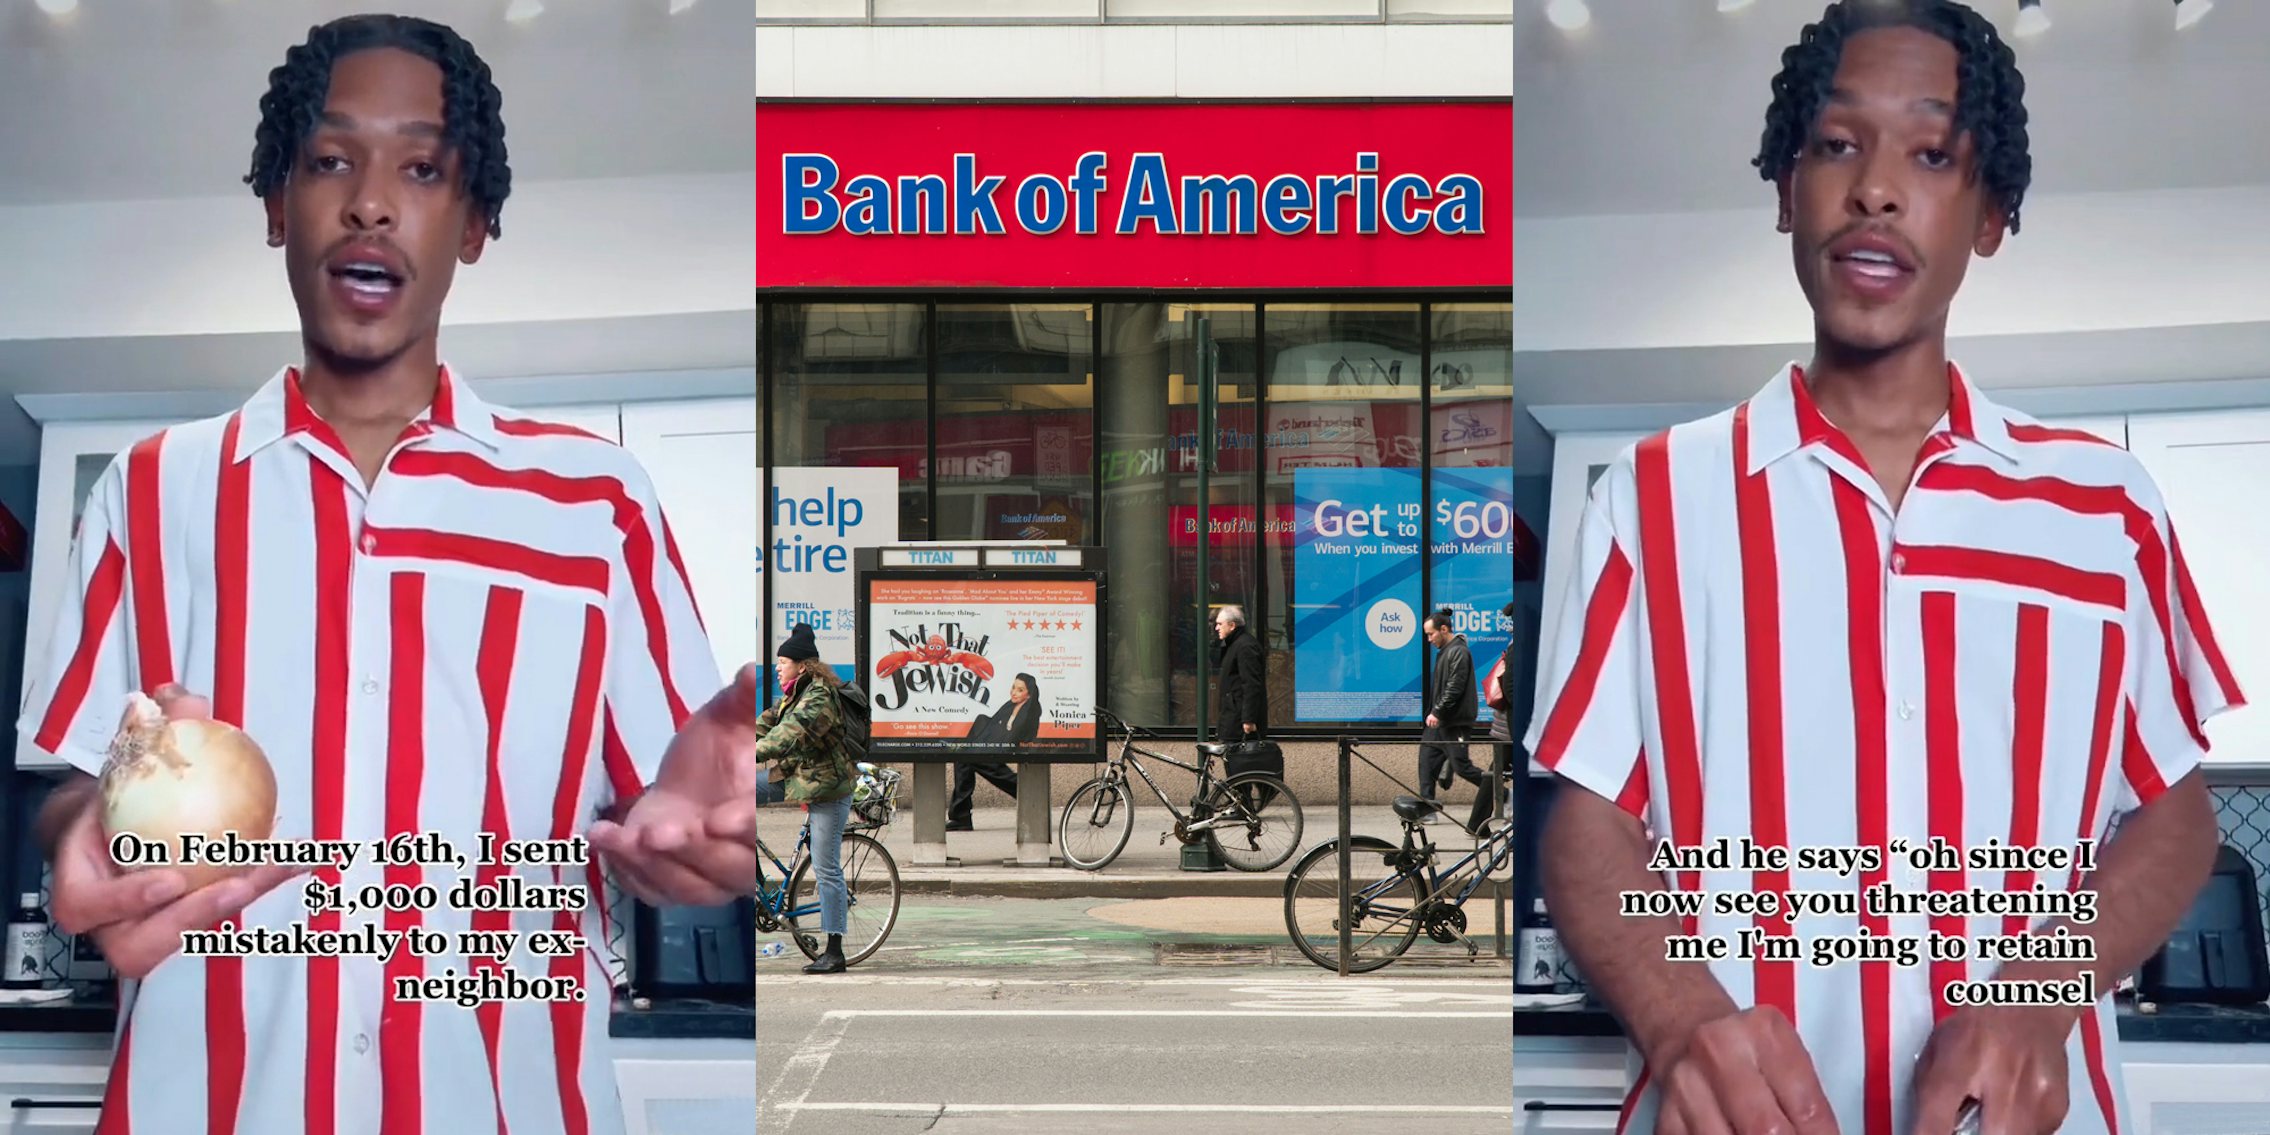 person speaking holding onion with caption 'On February 16th, I sent $1,000 dollars mistakenly to my ex-neighbor.' (l) Bank Of America sign on building in city (c) person speaking cutting onion with caption 'And he says 'oh since I now see you're threatening me I'm going to retain counsel' (r)